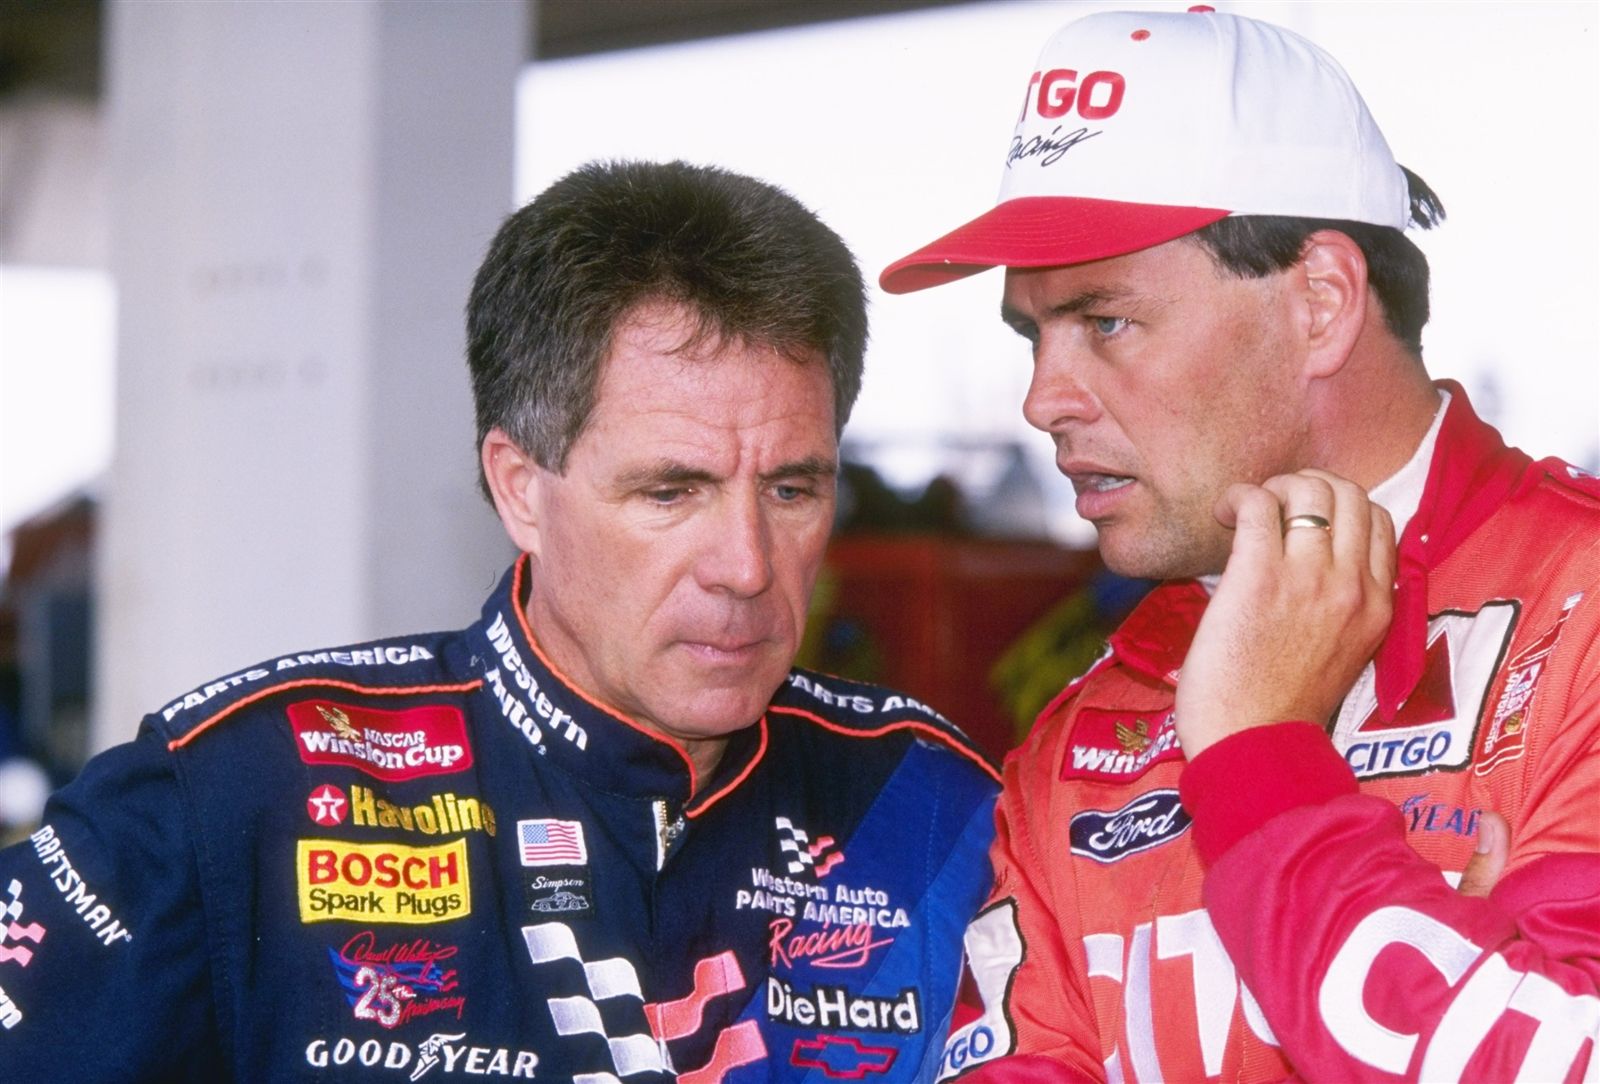 Darrell Waltrip talking to his brother Michael